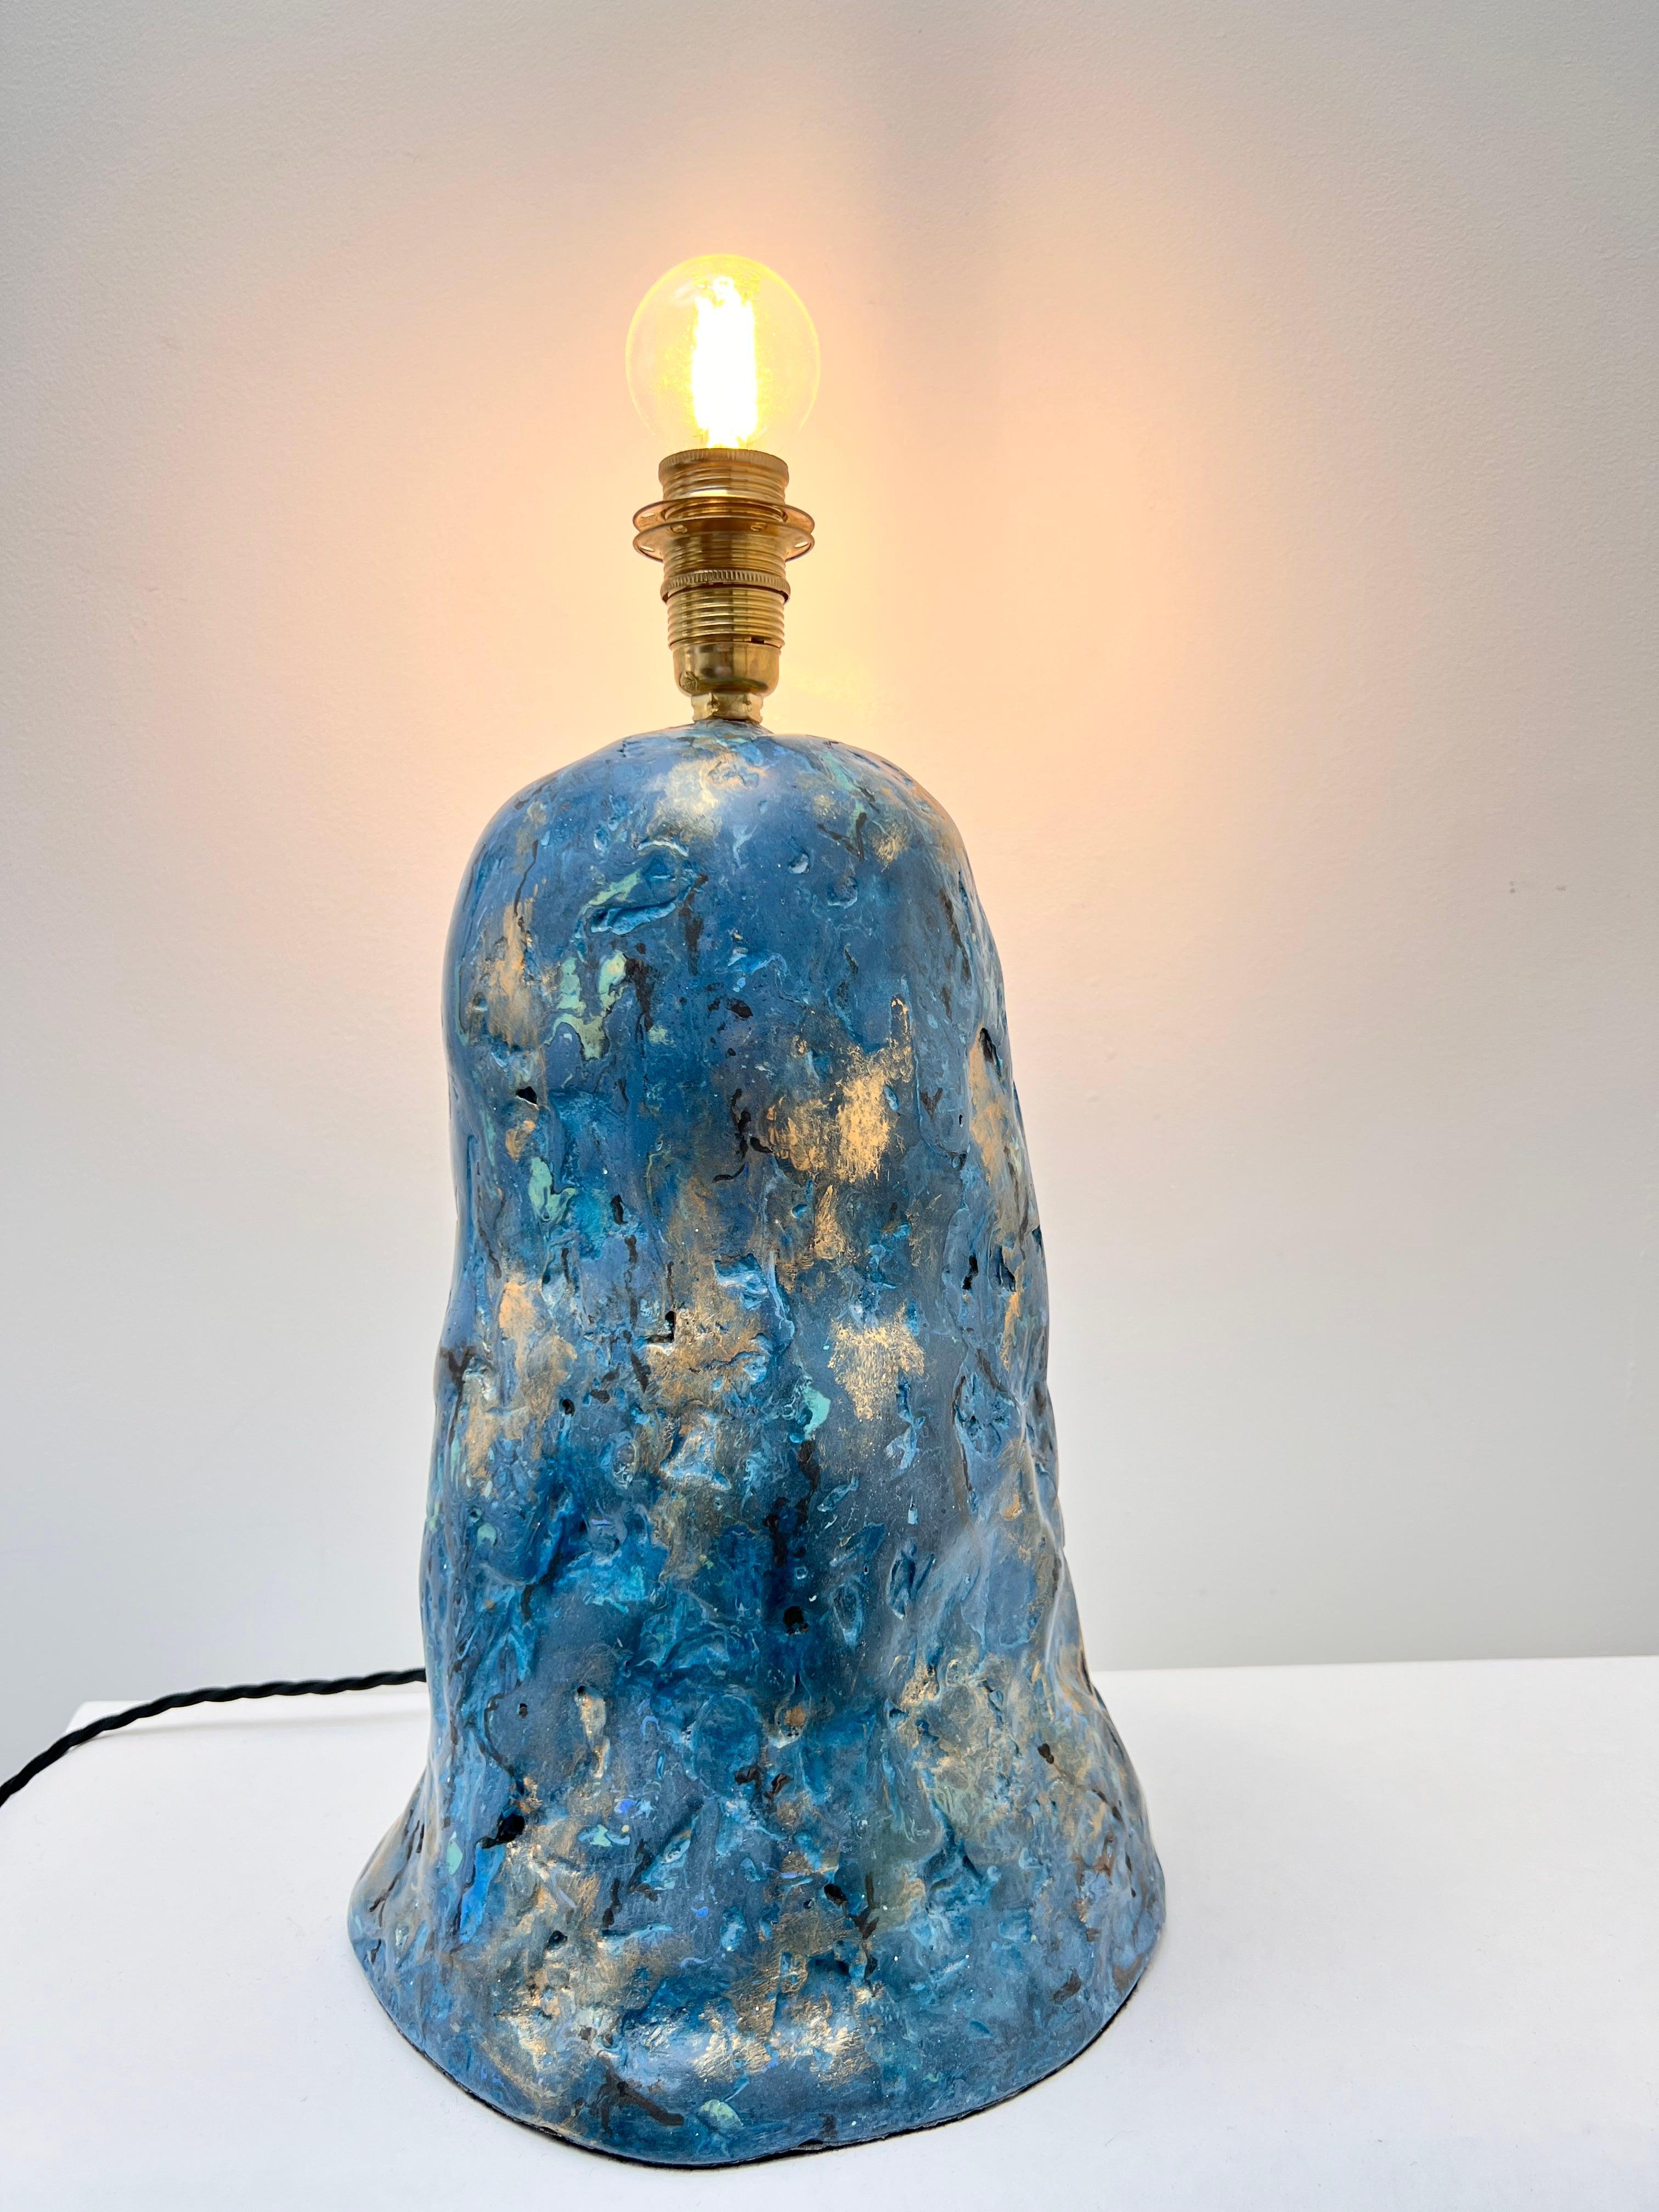 A one of a kind sculptural column table lamp hand crafted in pigmented Scagliola - a painstaking process  of crafting made stone in marbleised form. This technique entails multiple stages of repetitive sanding, filling and polishing, resulting in a